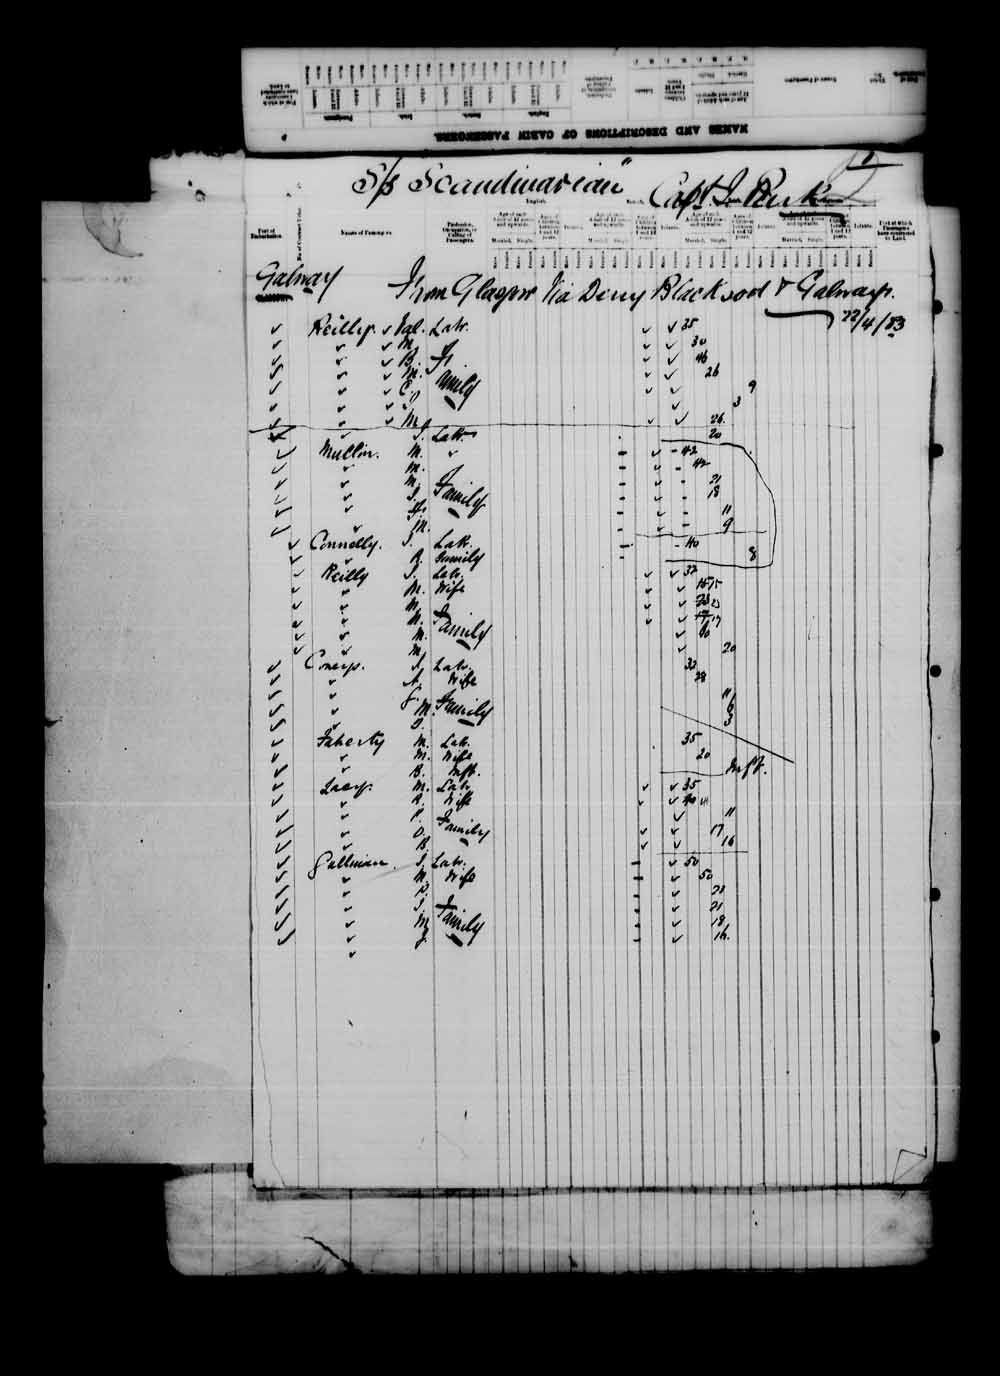 Digitized page of Passenger Lists for Image No.: e003542674